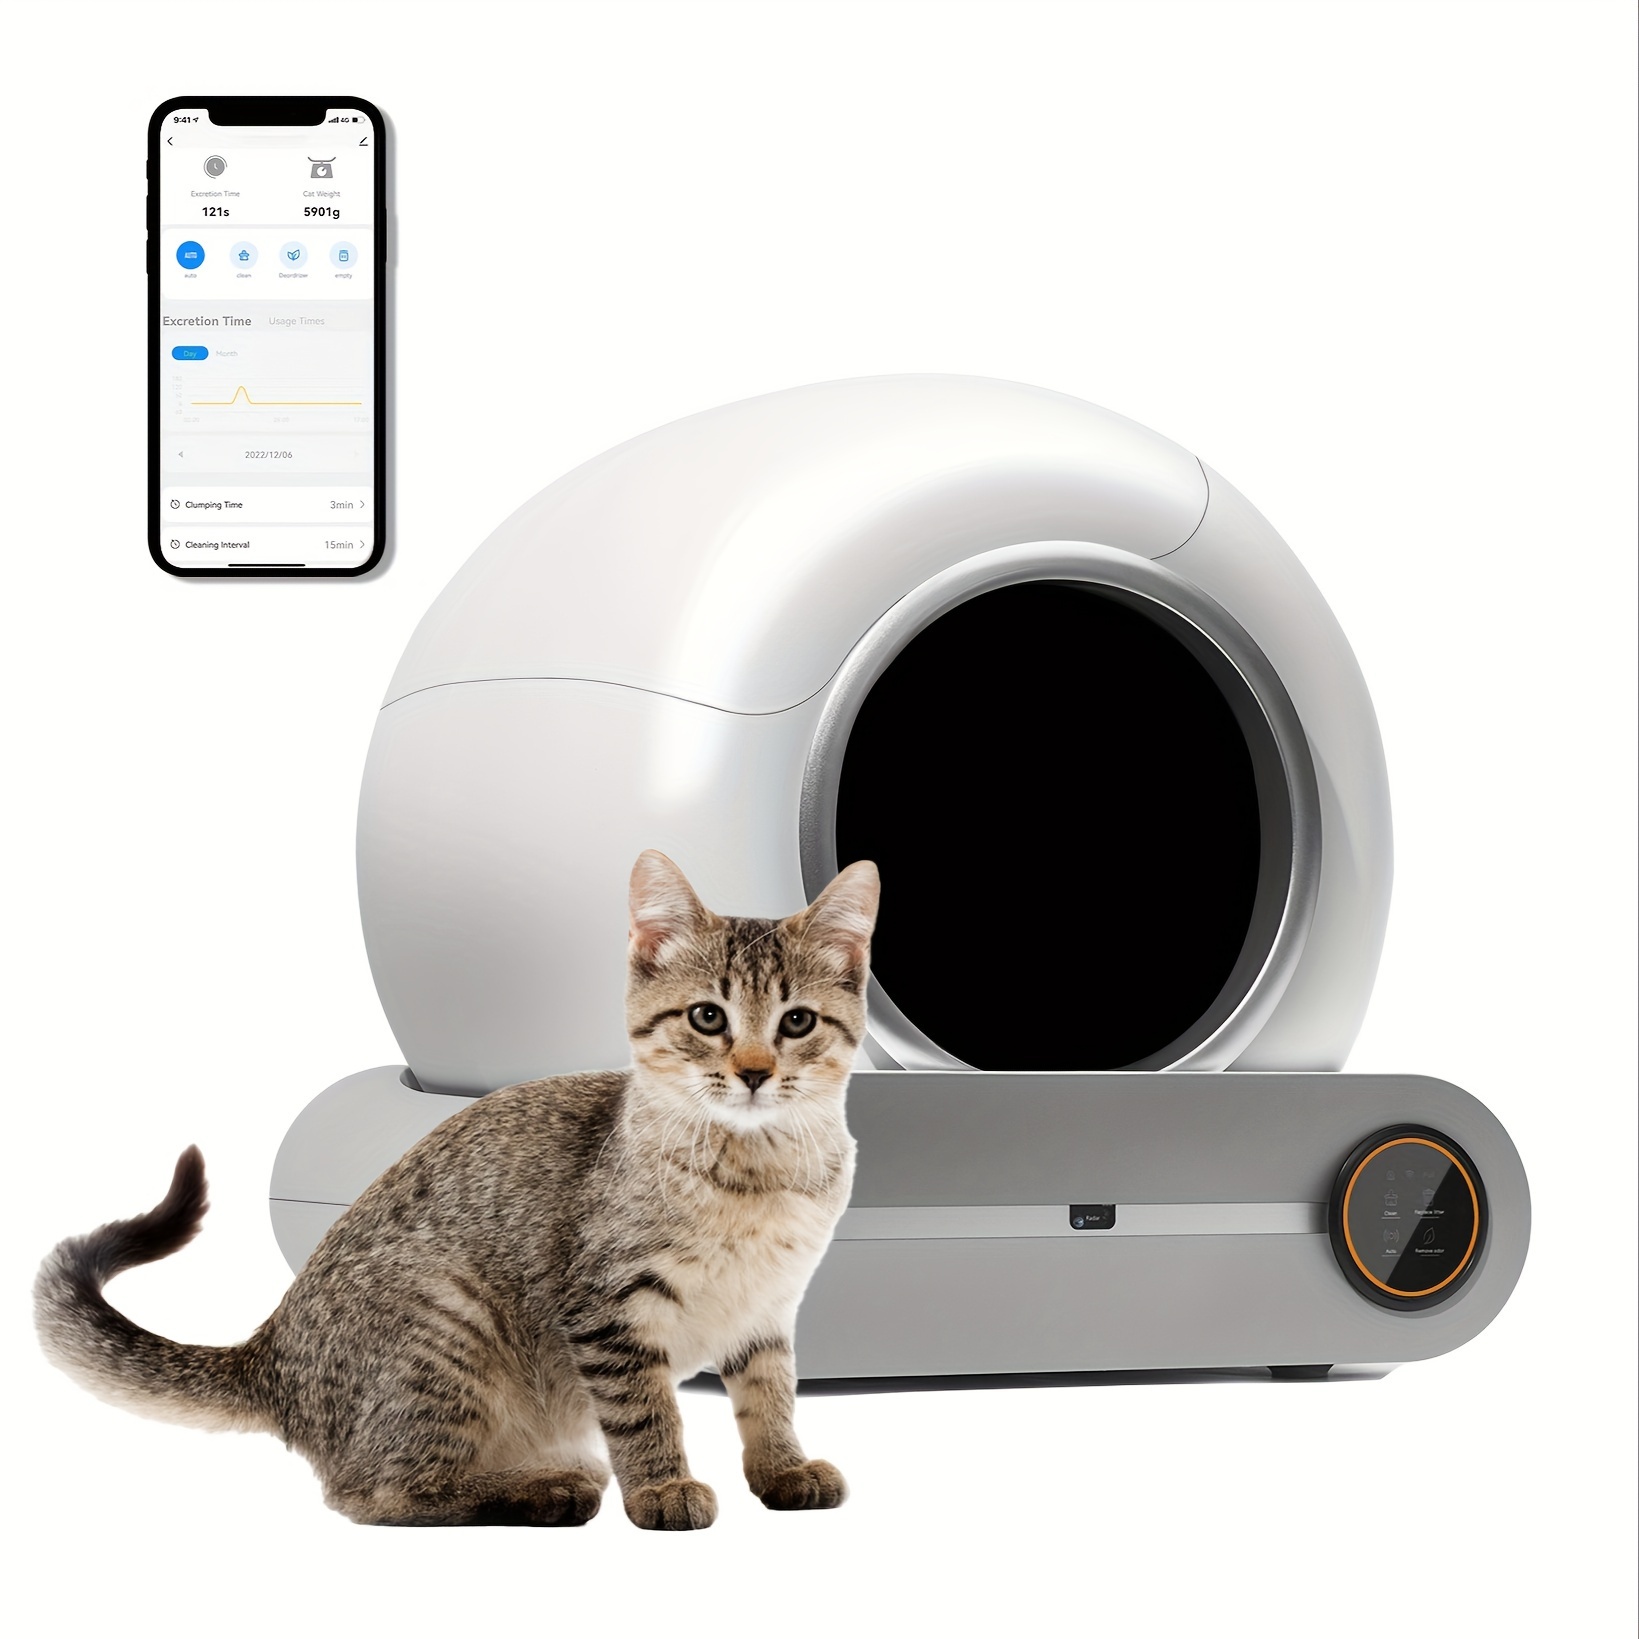 

Smart Cat Litter Box, Automatic Litter Box, Suitable For 1-3 Cats, Self-cleaning Large Capacity Cleaning Robot, App Control/odor Removal/safety Protection Smart Cat Litter Box